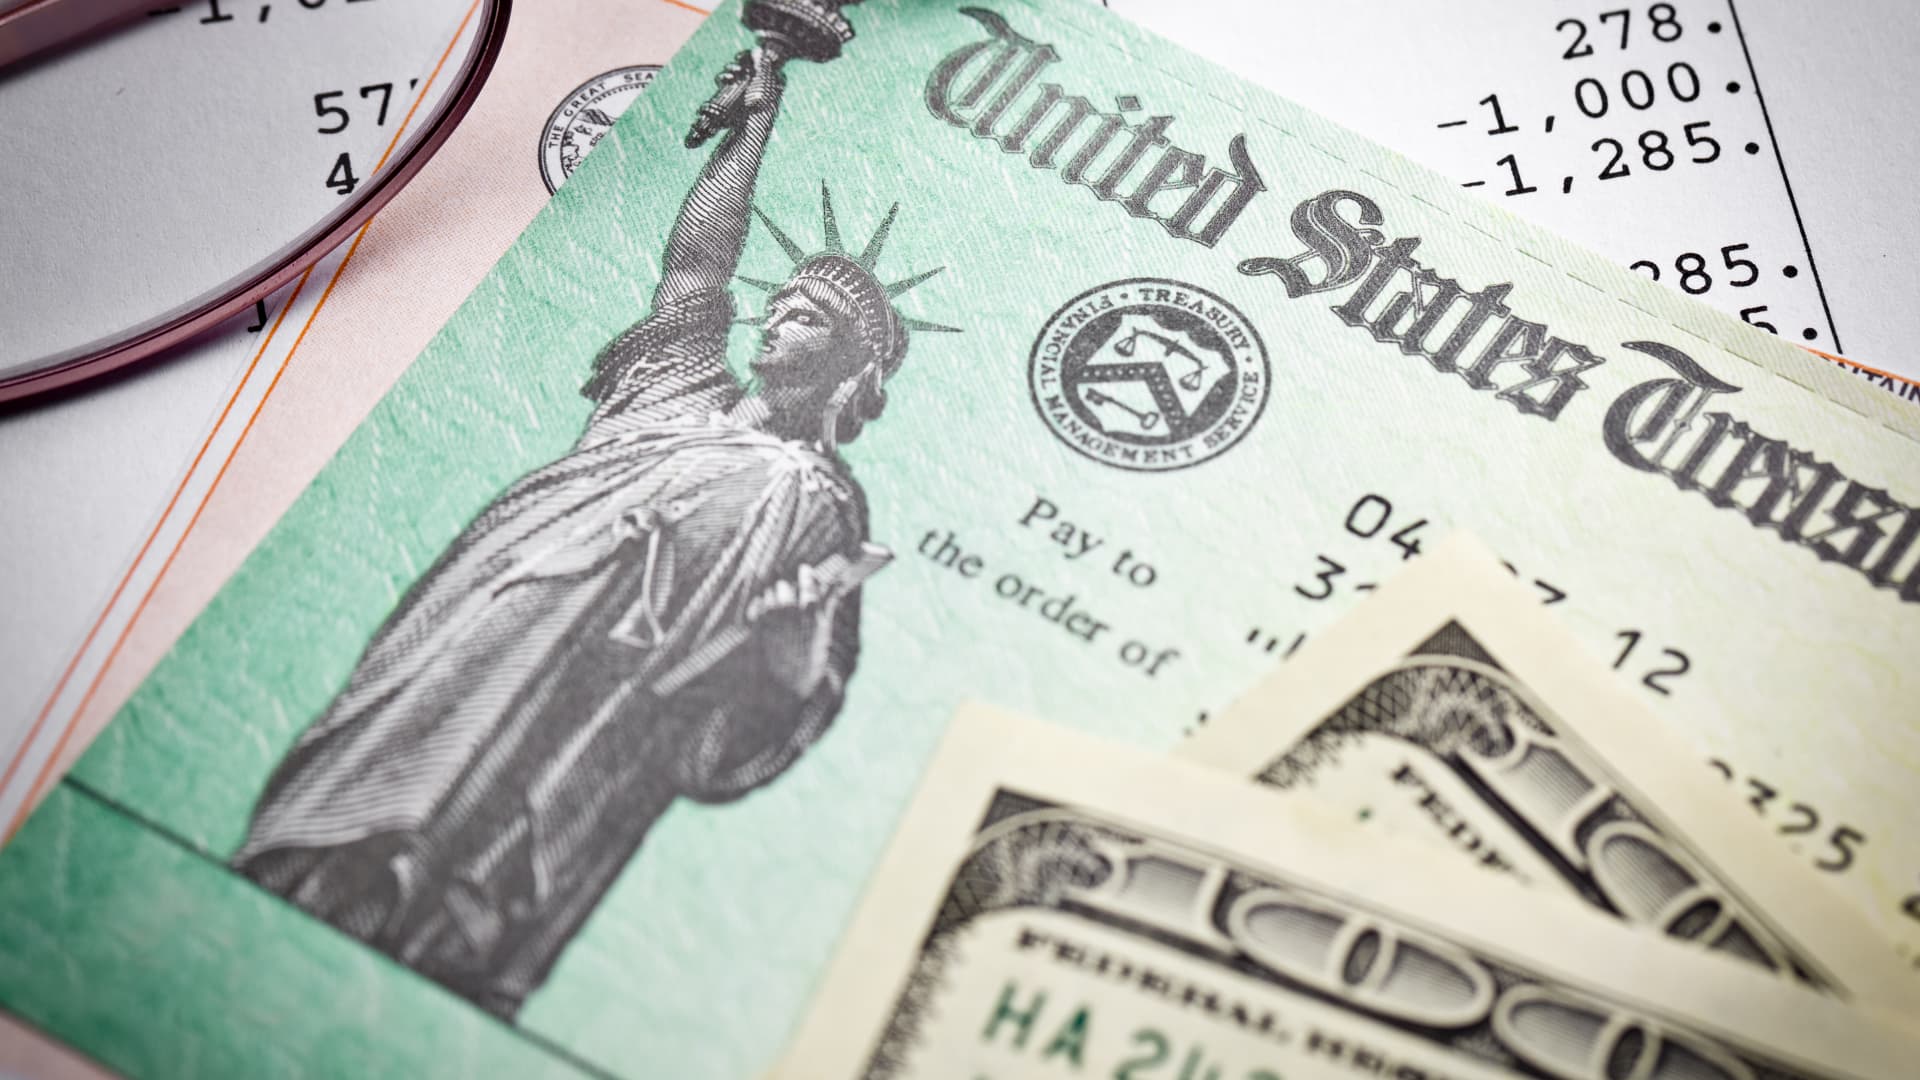 Here's why your tax refund may be smaller this year